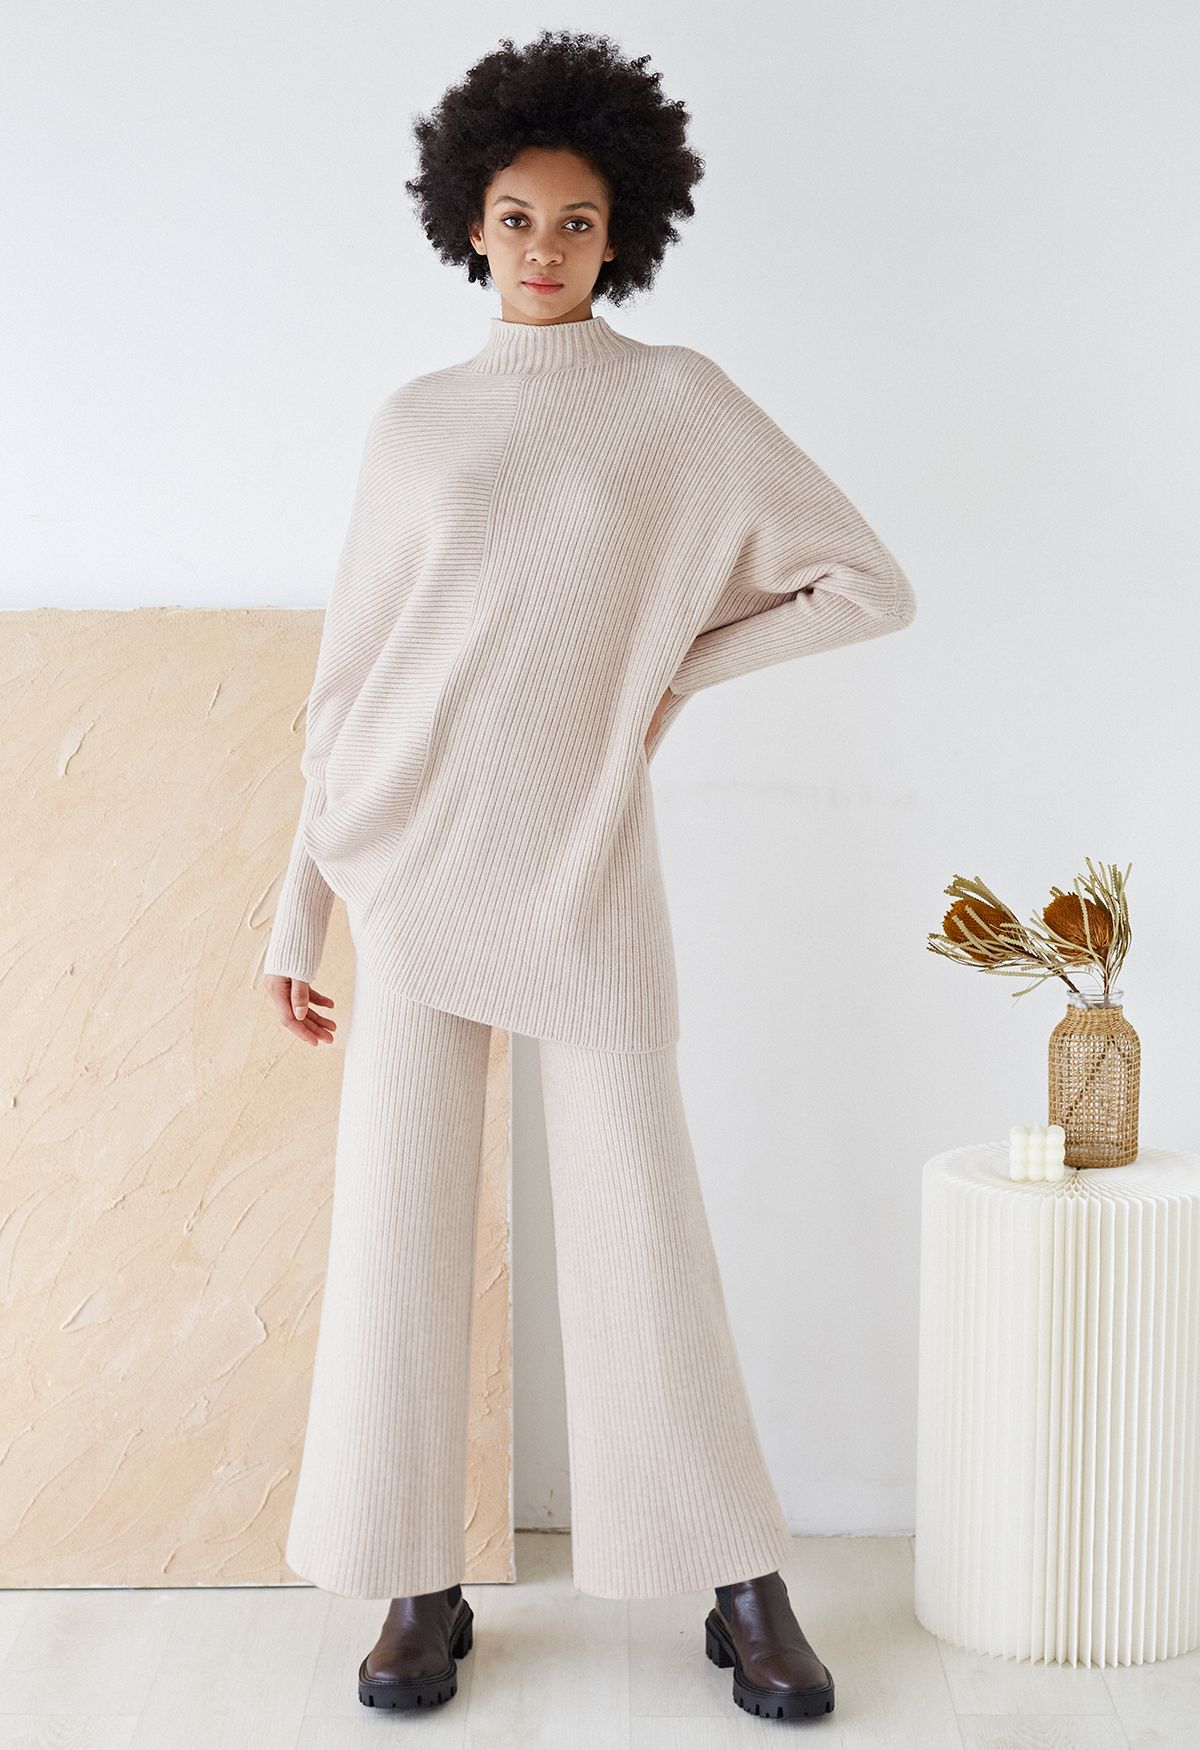 Asymmetric Batwing Sleeve Sweater and Pants Knit Set in Light Tan